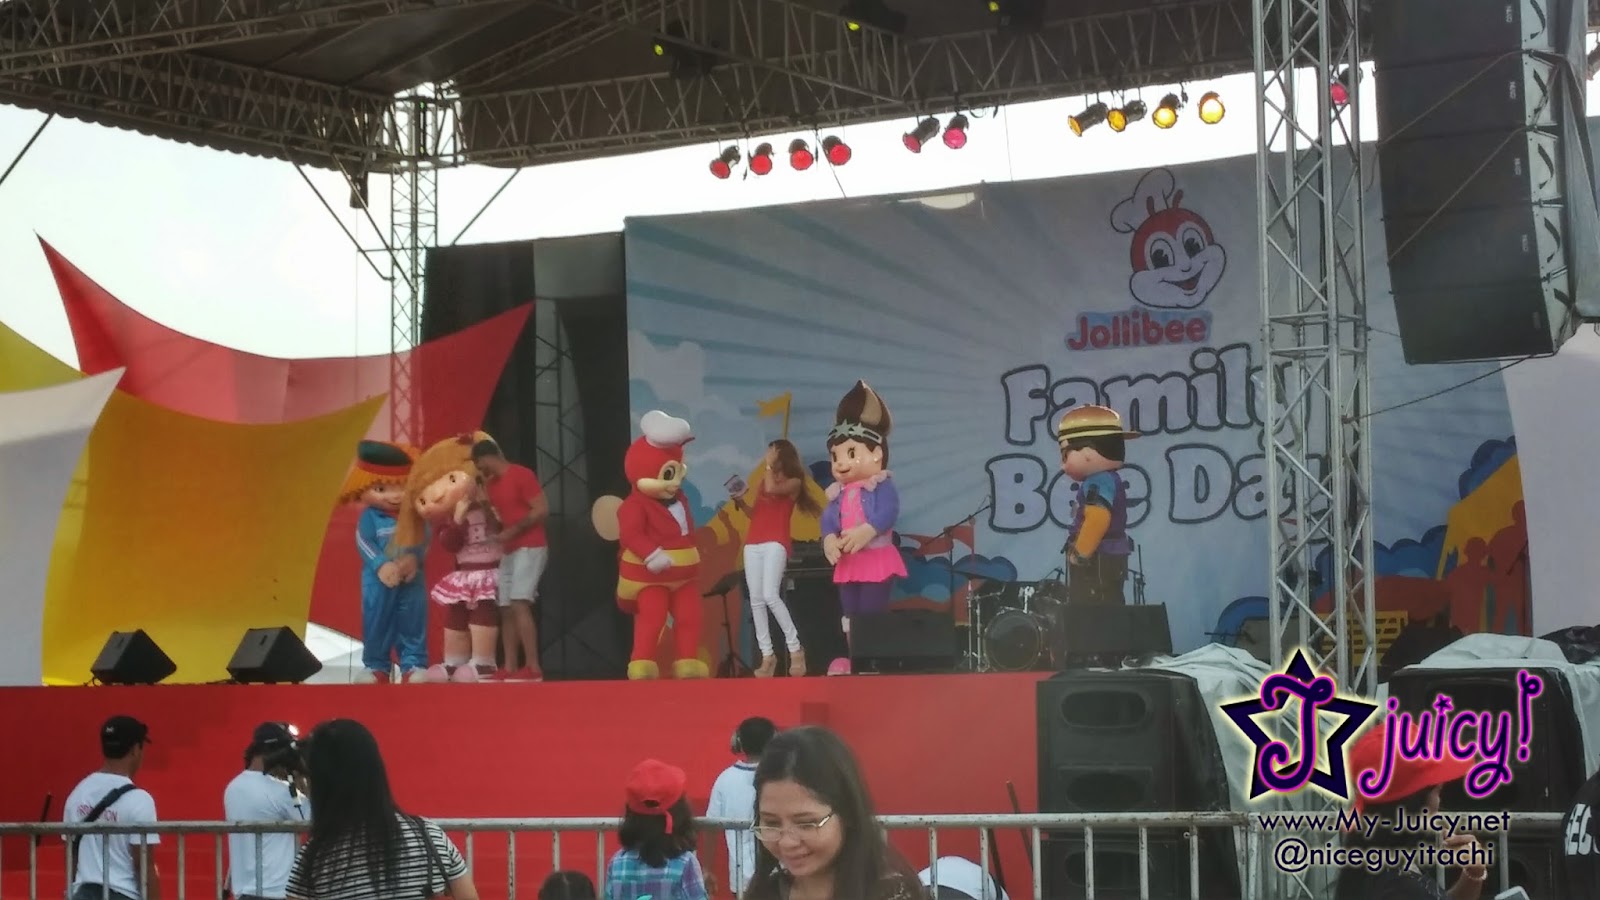 Family Bee Day by Jollibee